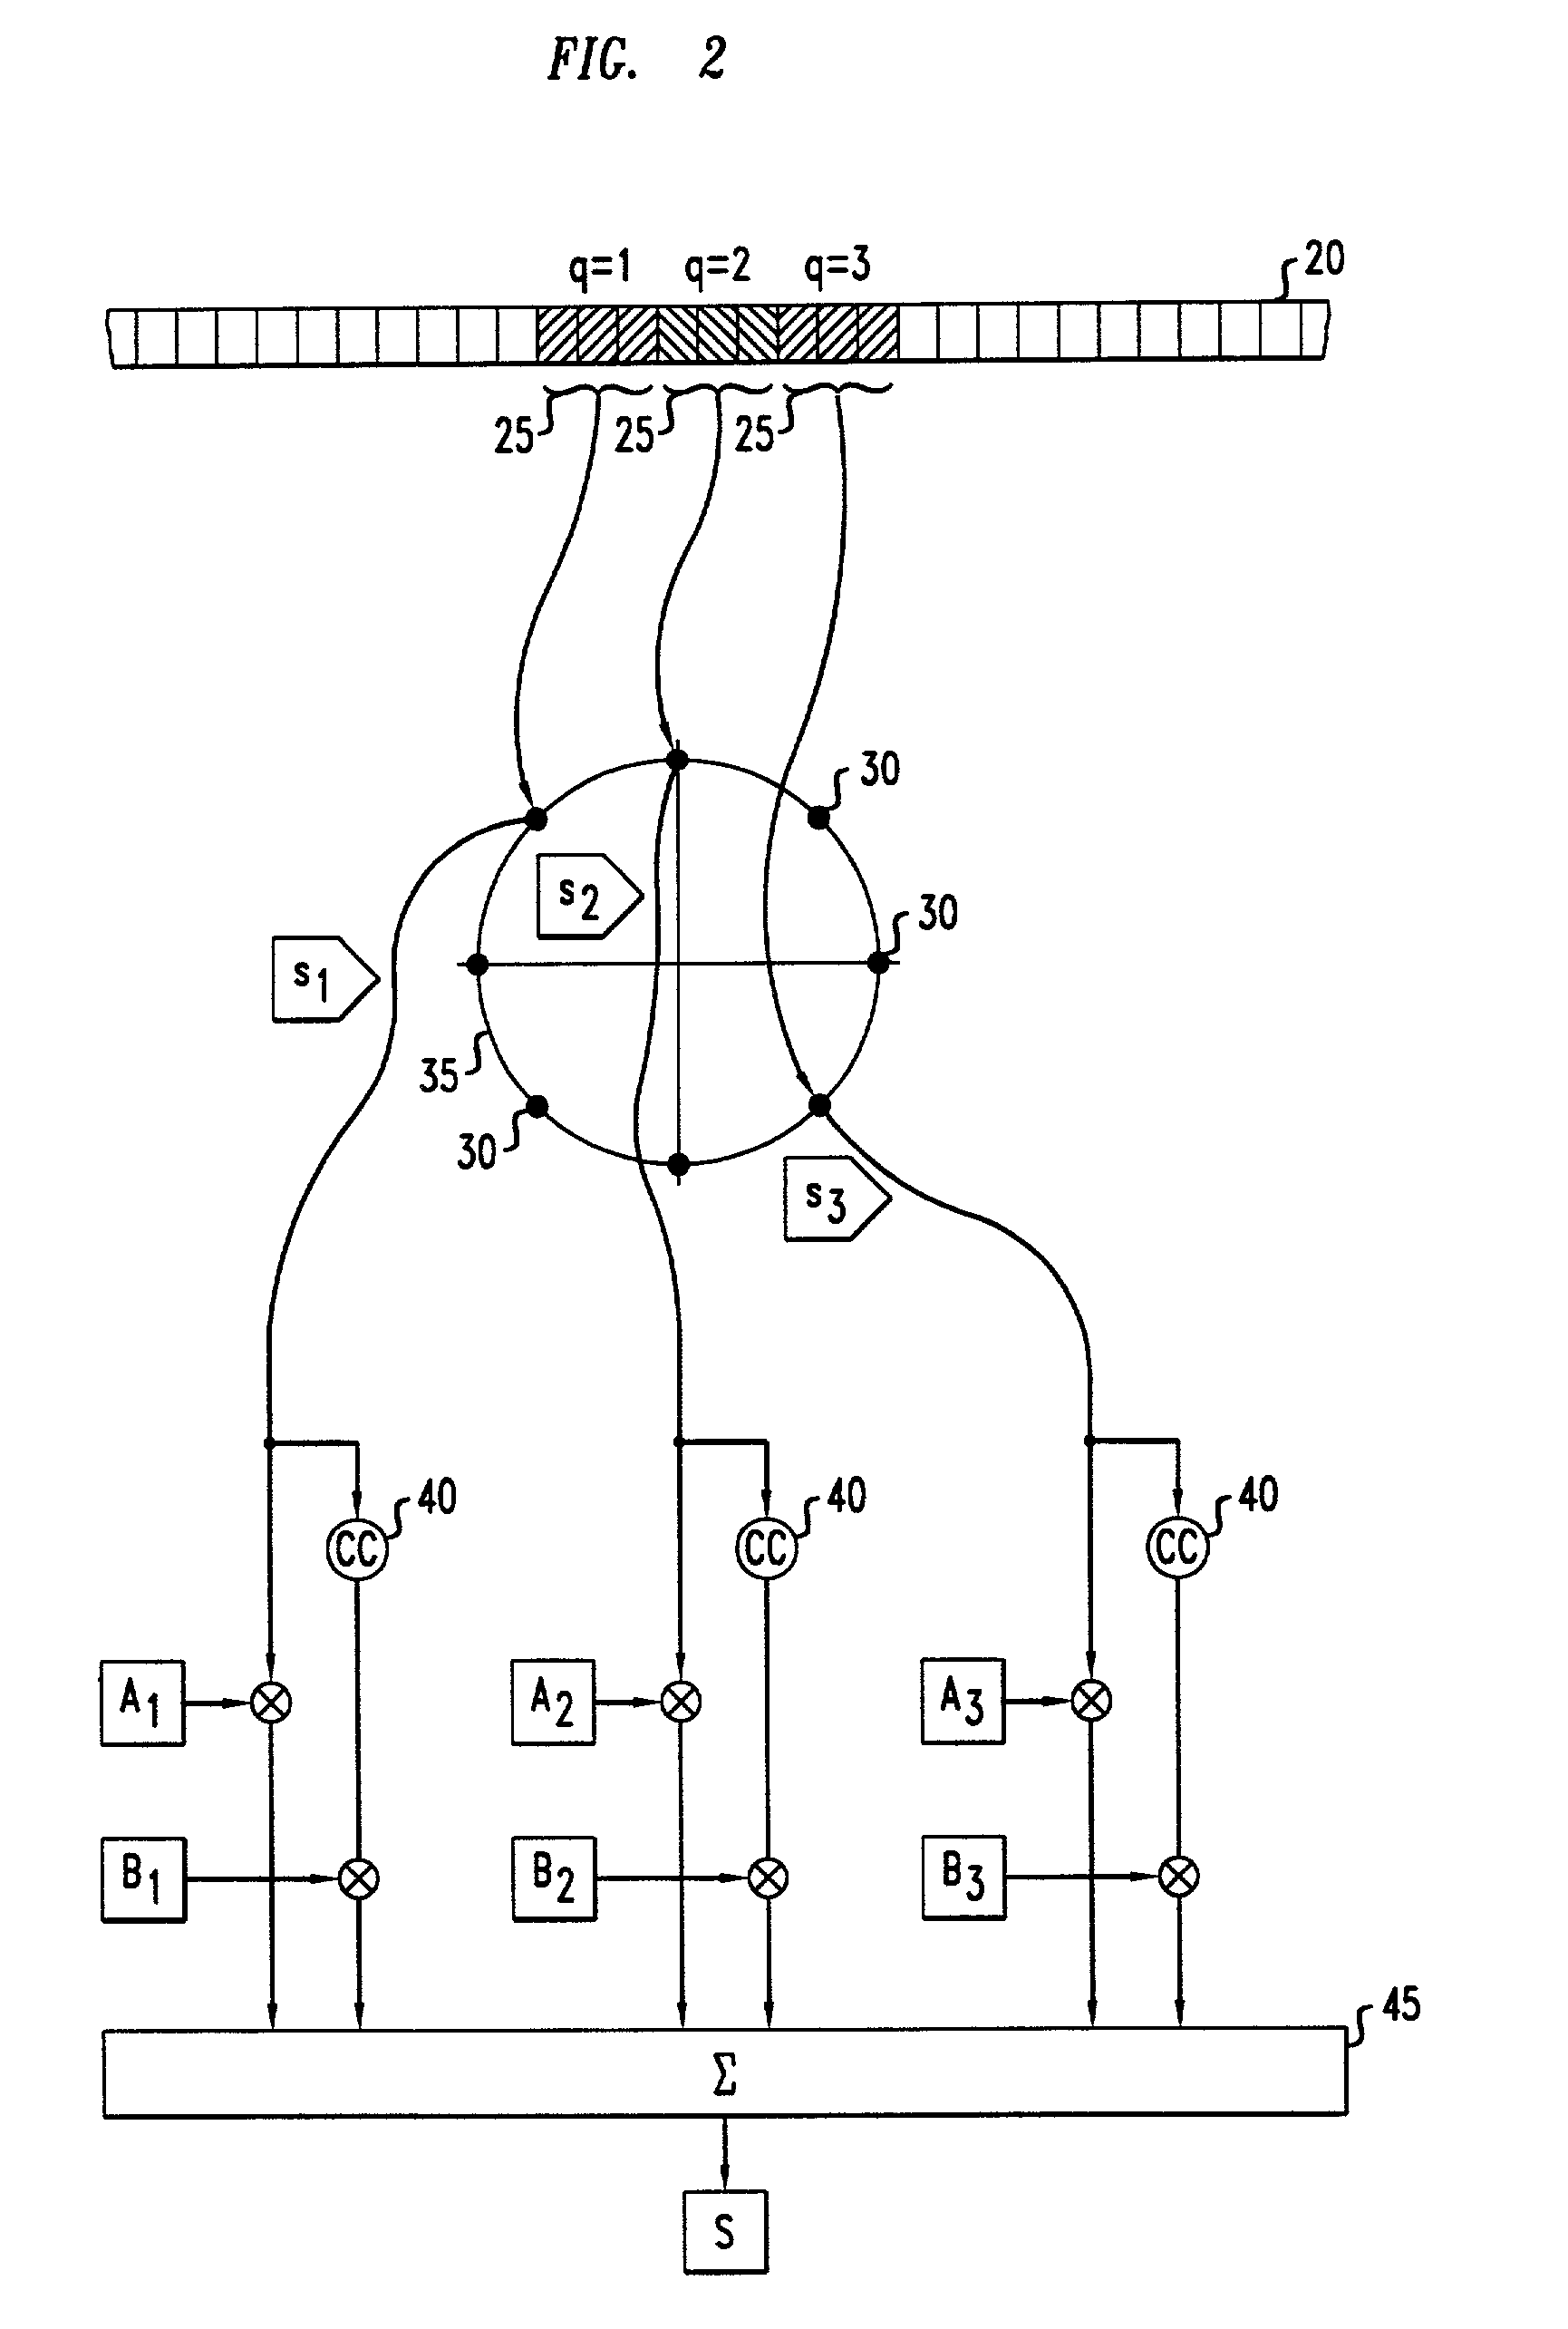 Method of multiple-antenna wireless communication using space-time codes